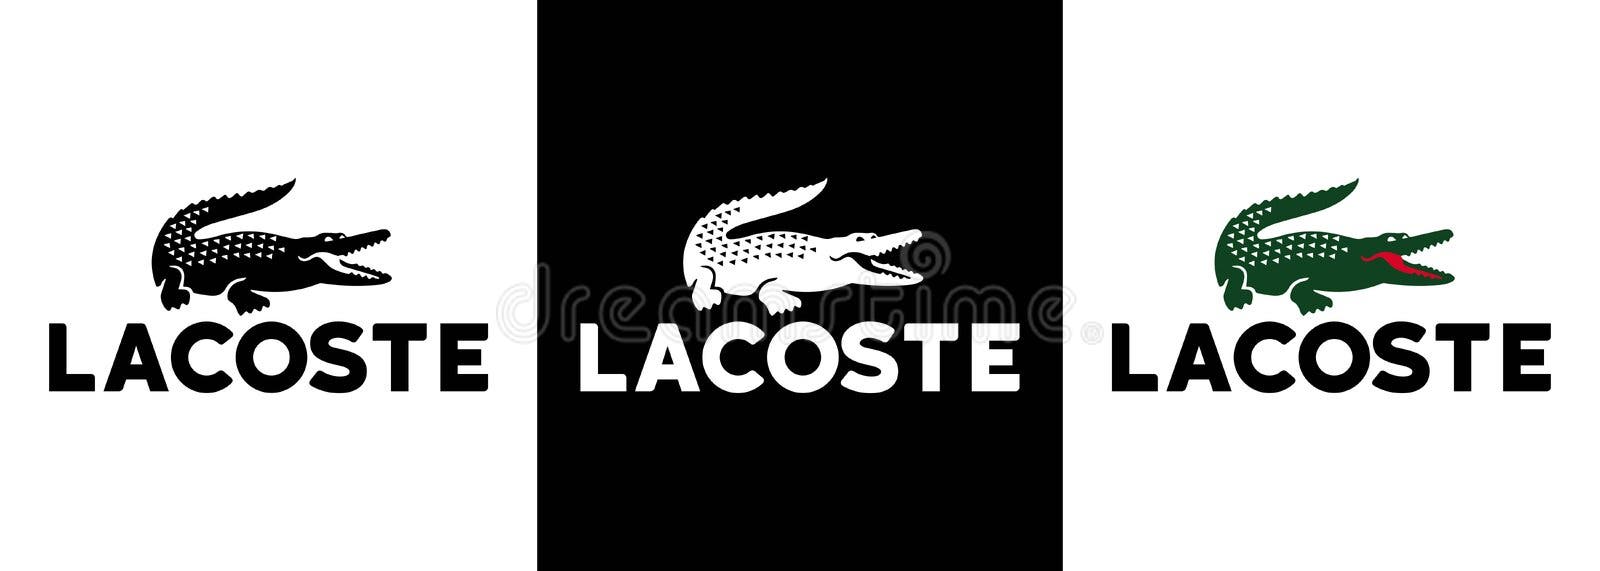 Logo Brand T-shirt Lacoste Clothing PNG, Clipart, Blue, Brand, Business,  Casual, Clothing Free PNG Download